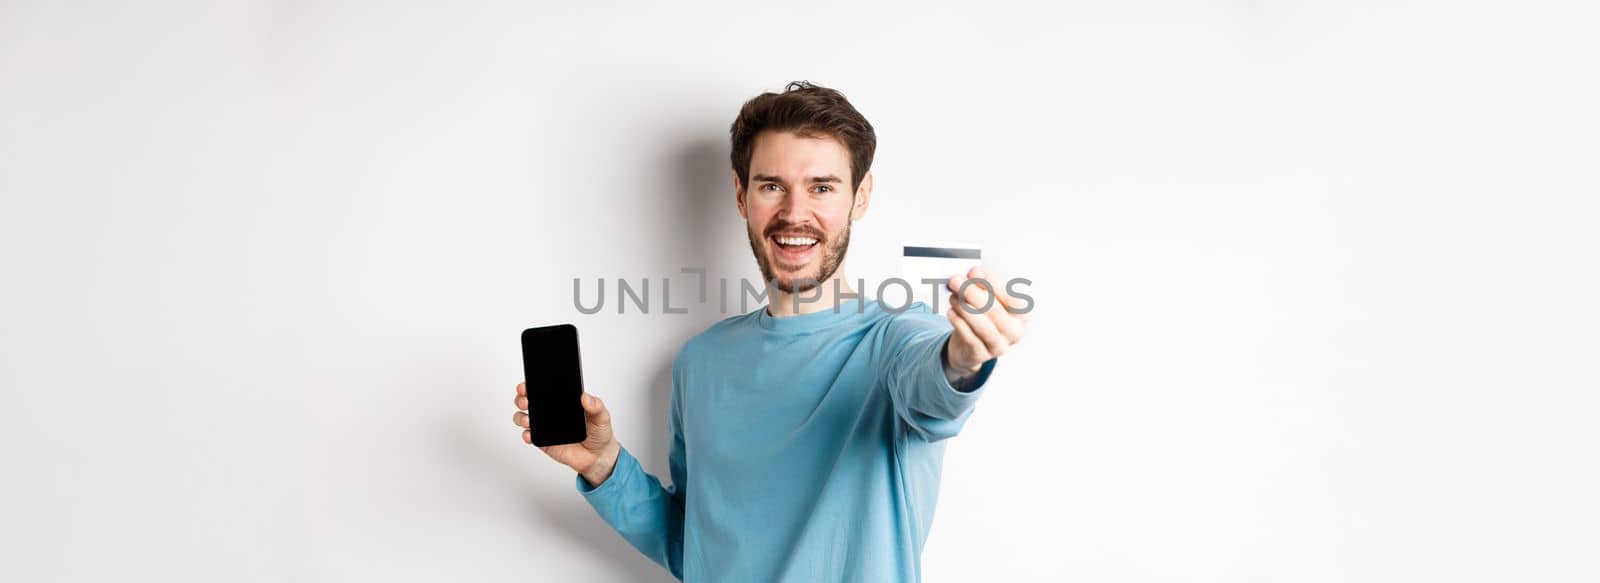 E-commerce and shopping concept. Happy man showing plastic credit card and screen of smartphone, recommending banking app, standing on white background.